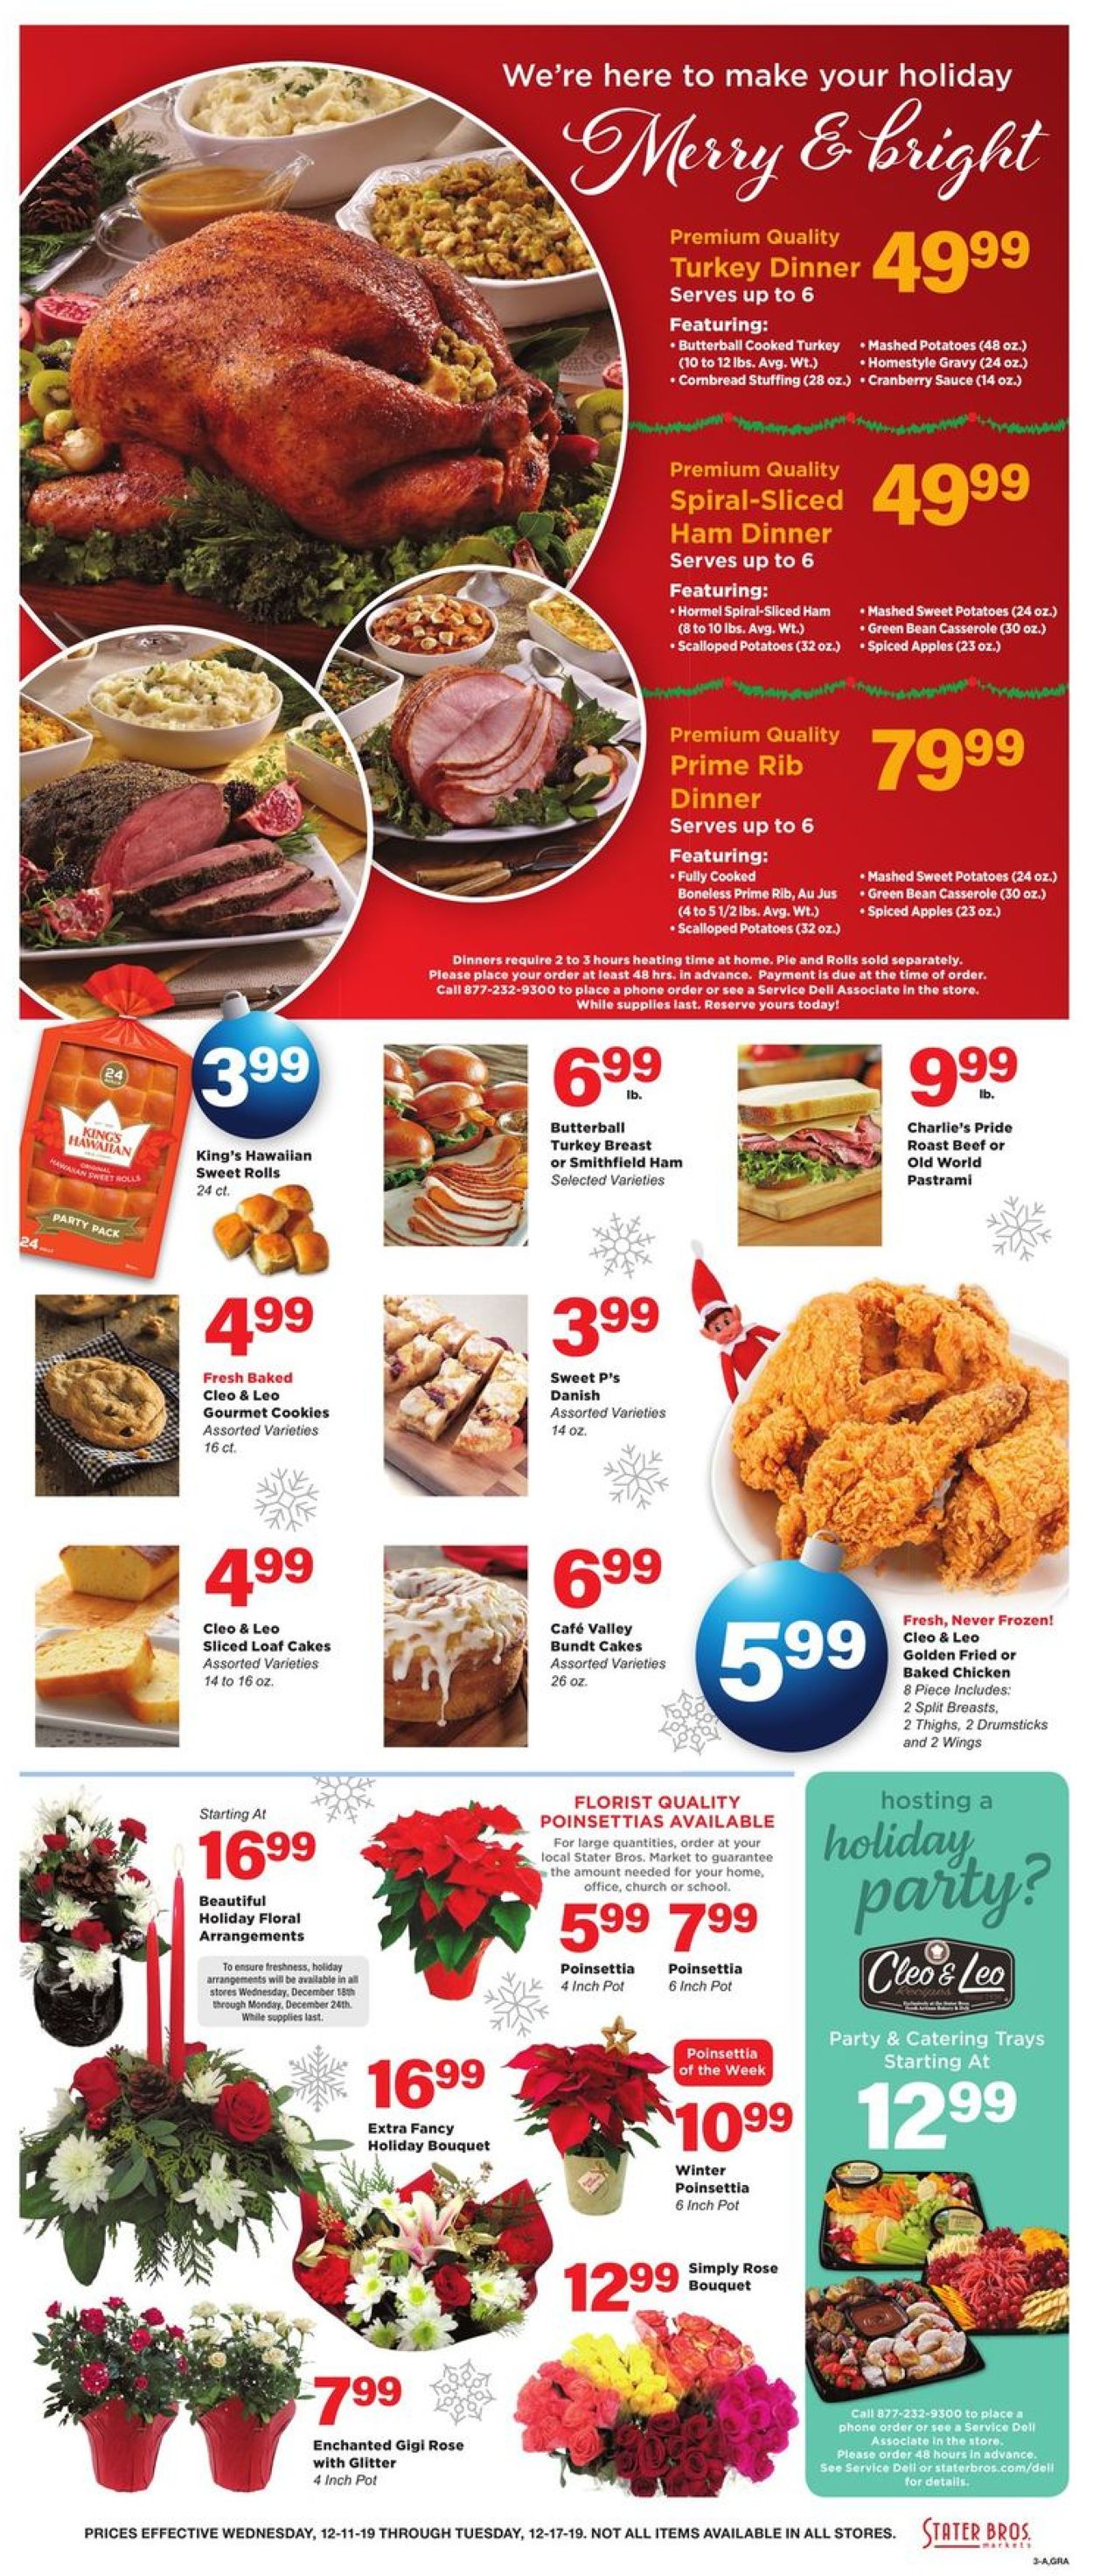 Catalogue Stater Bros. - Christmas Ad 2019 from 12/11/2019